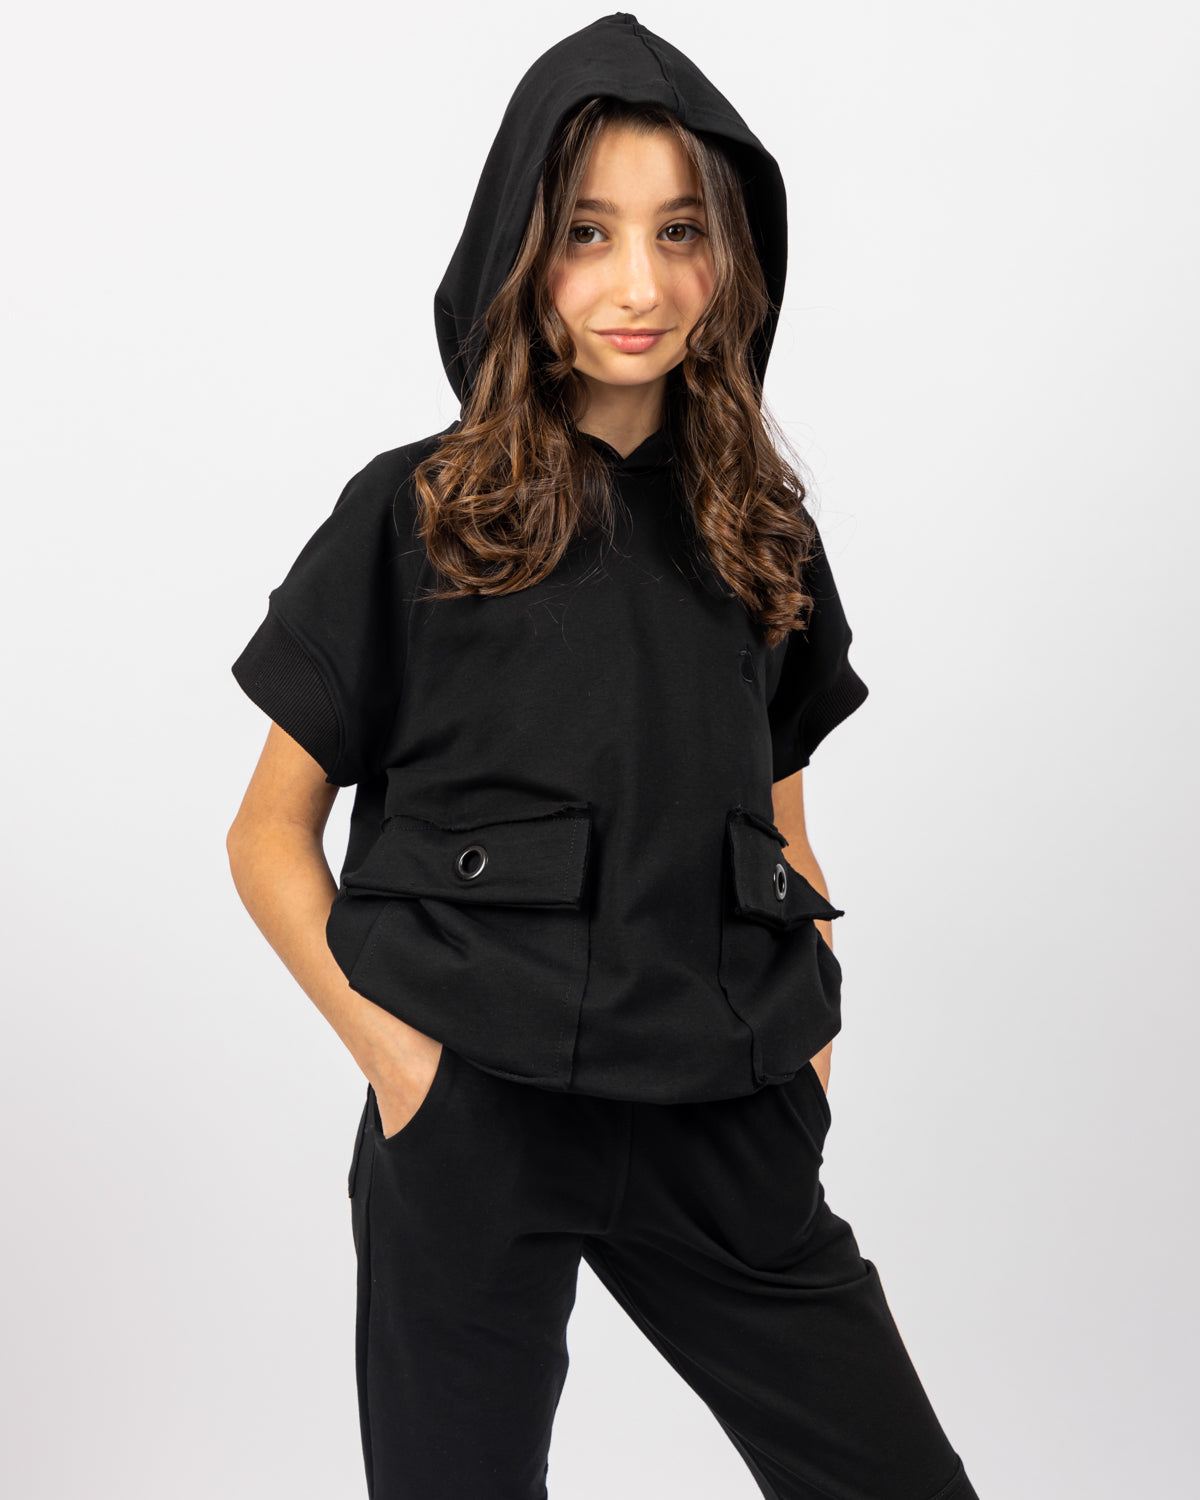 Cropped Sweatshirt with Big Pockets For Girls - Black